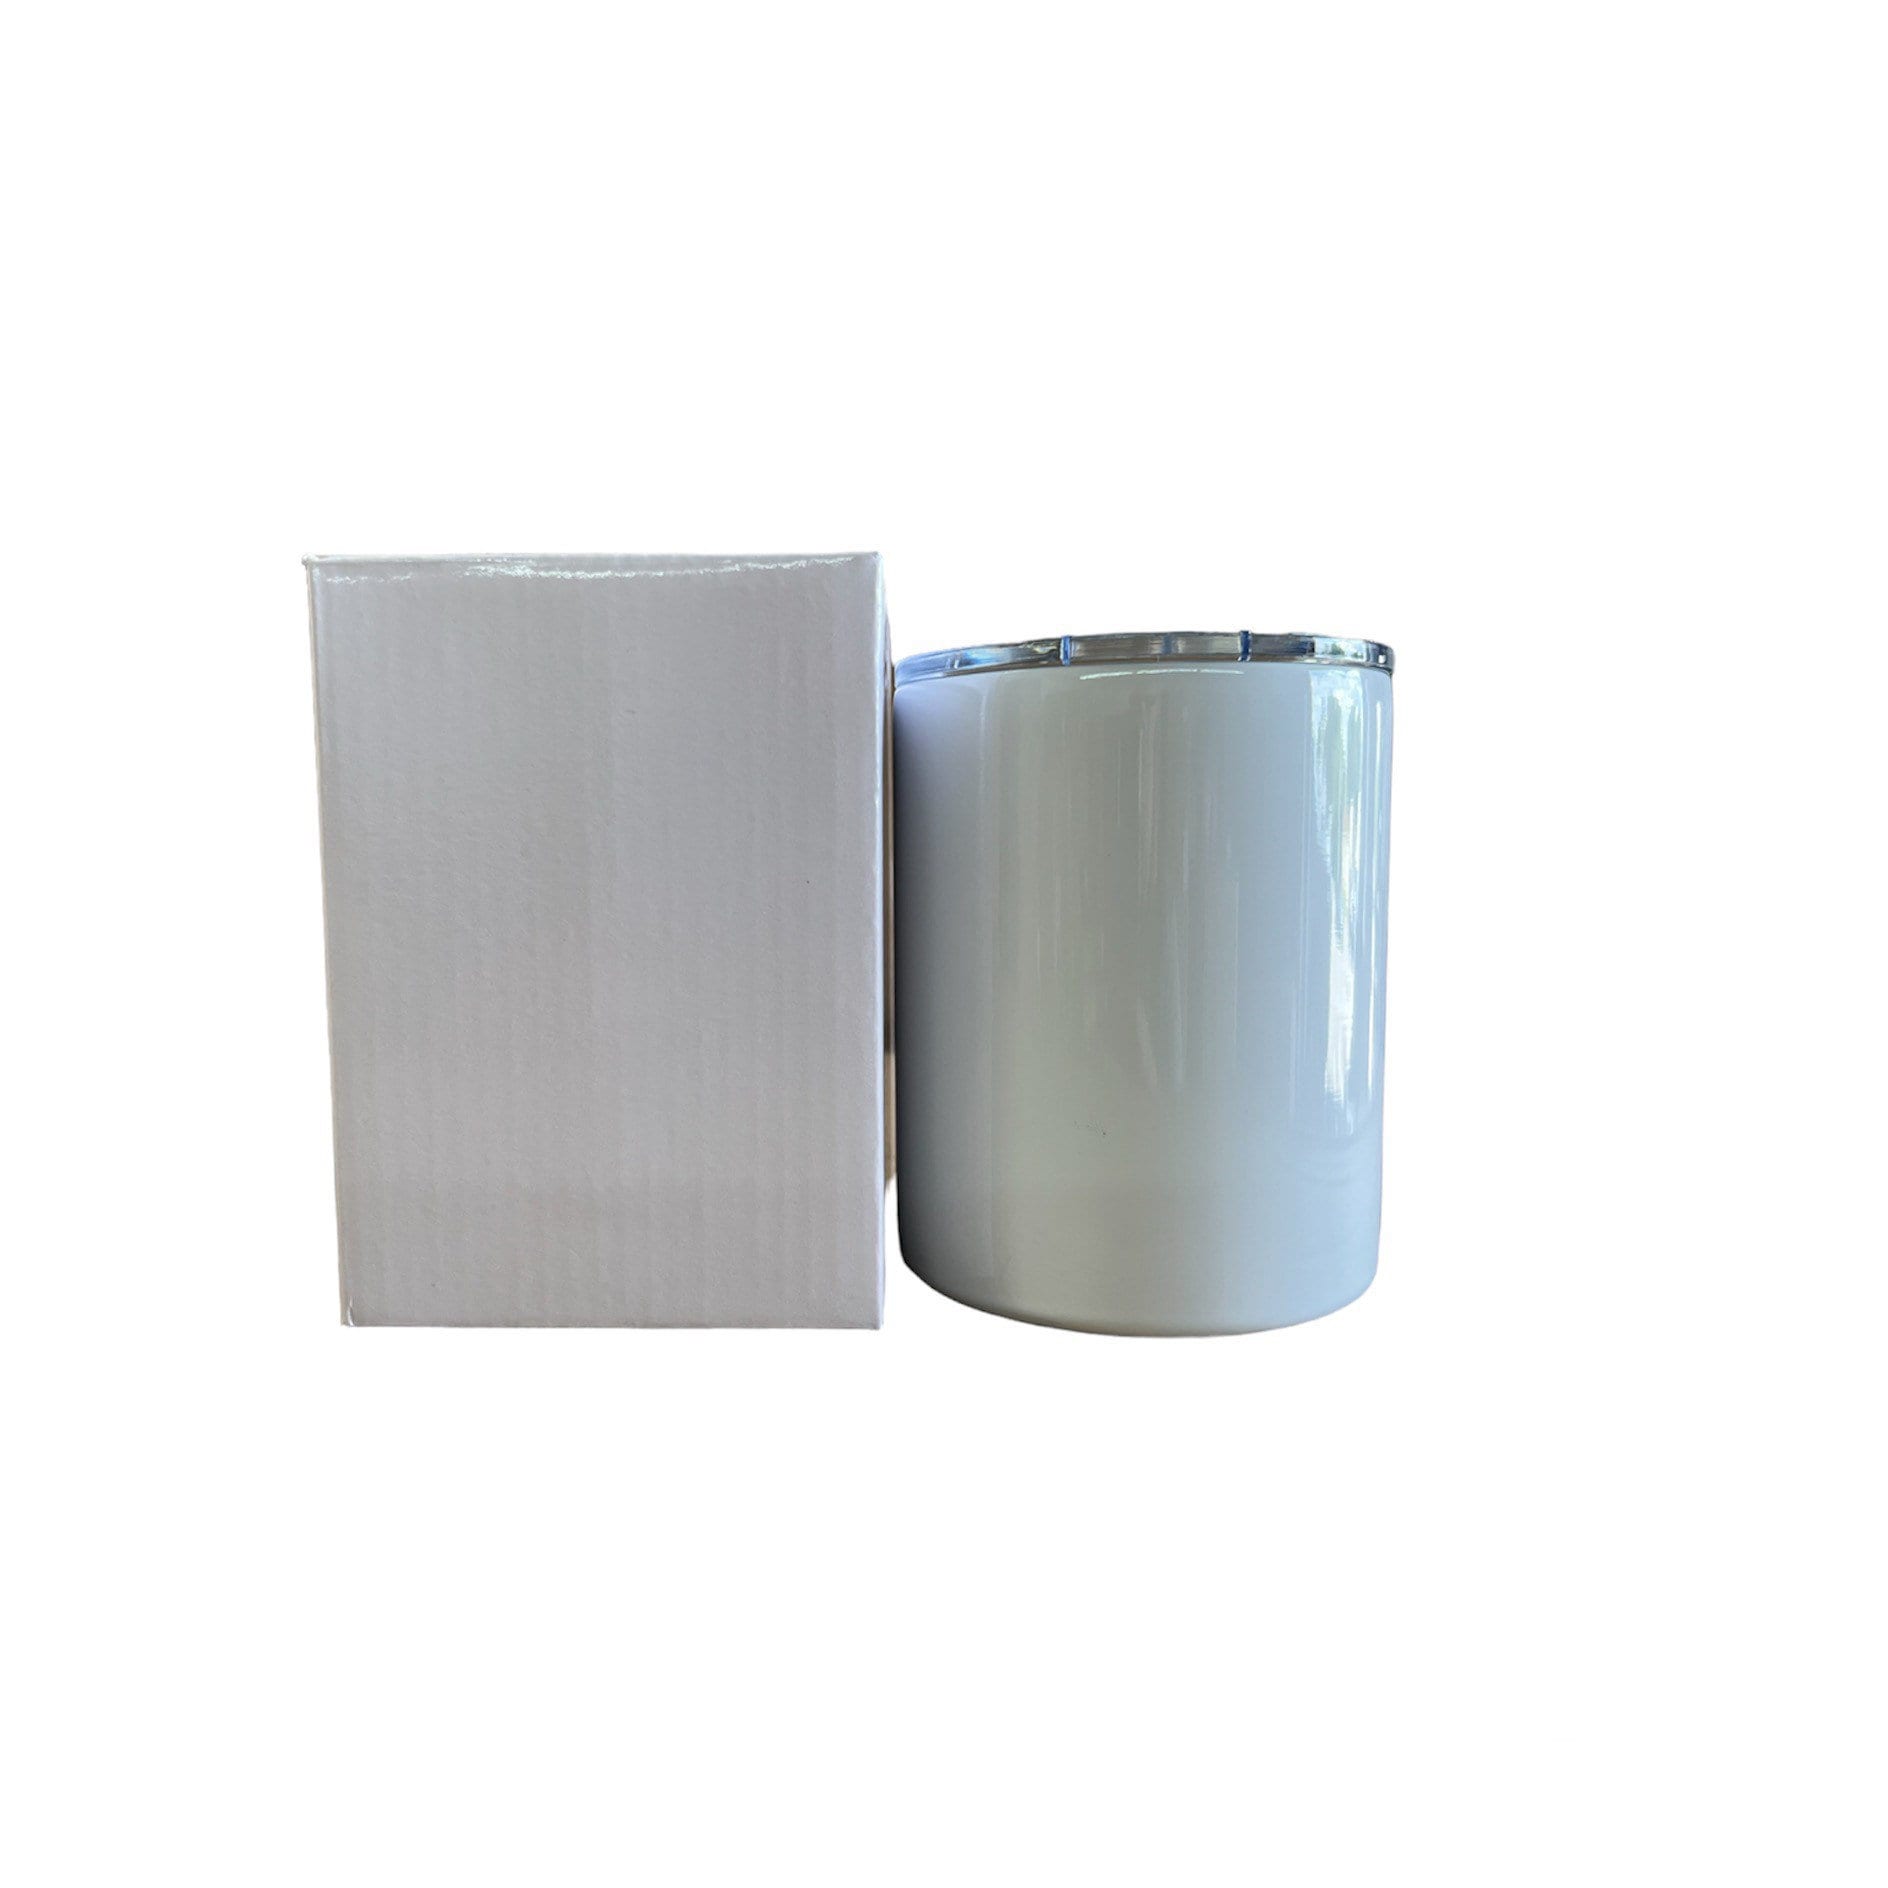 10 PACK White Shrink Wrap with perforation for 20oz Tapered and Straight  Skinny Sublimation Tumblers